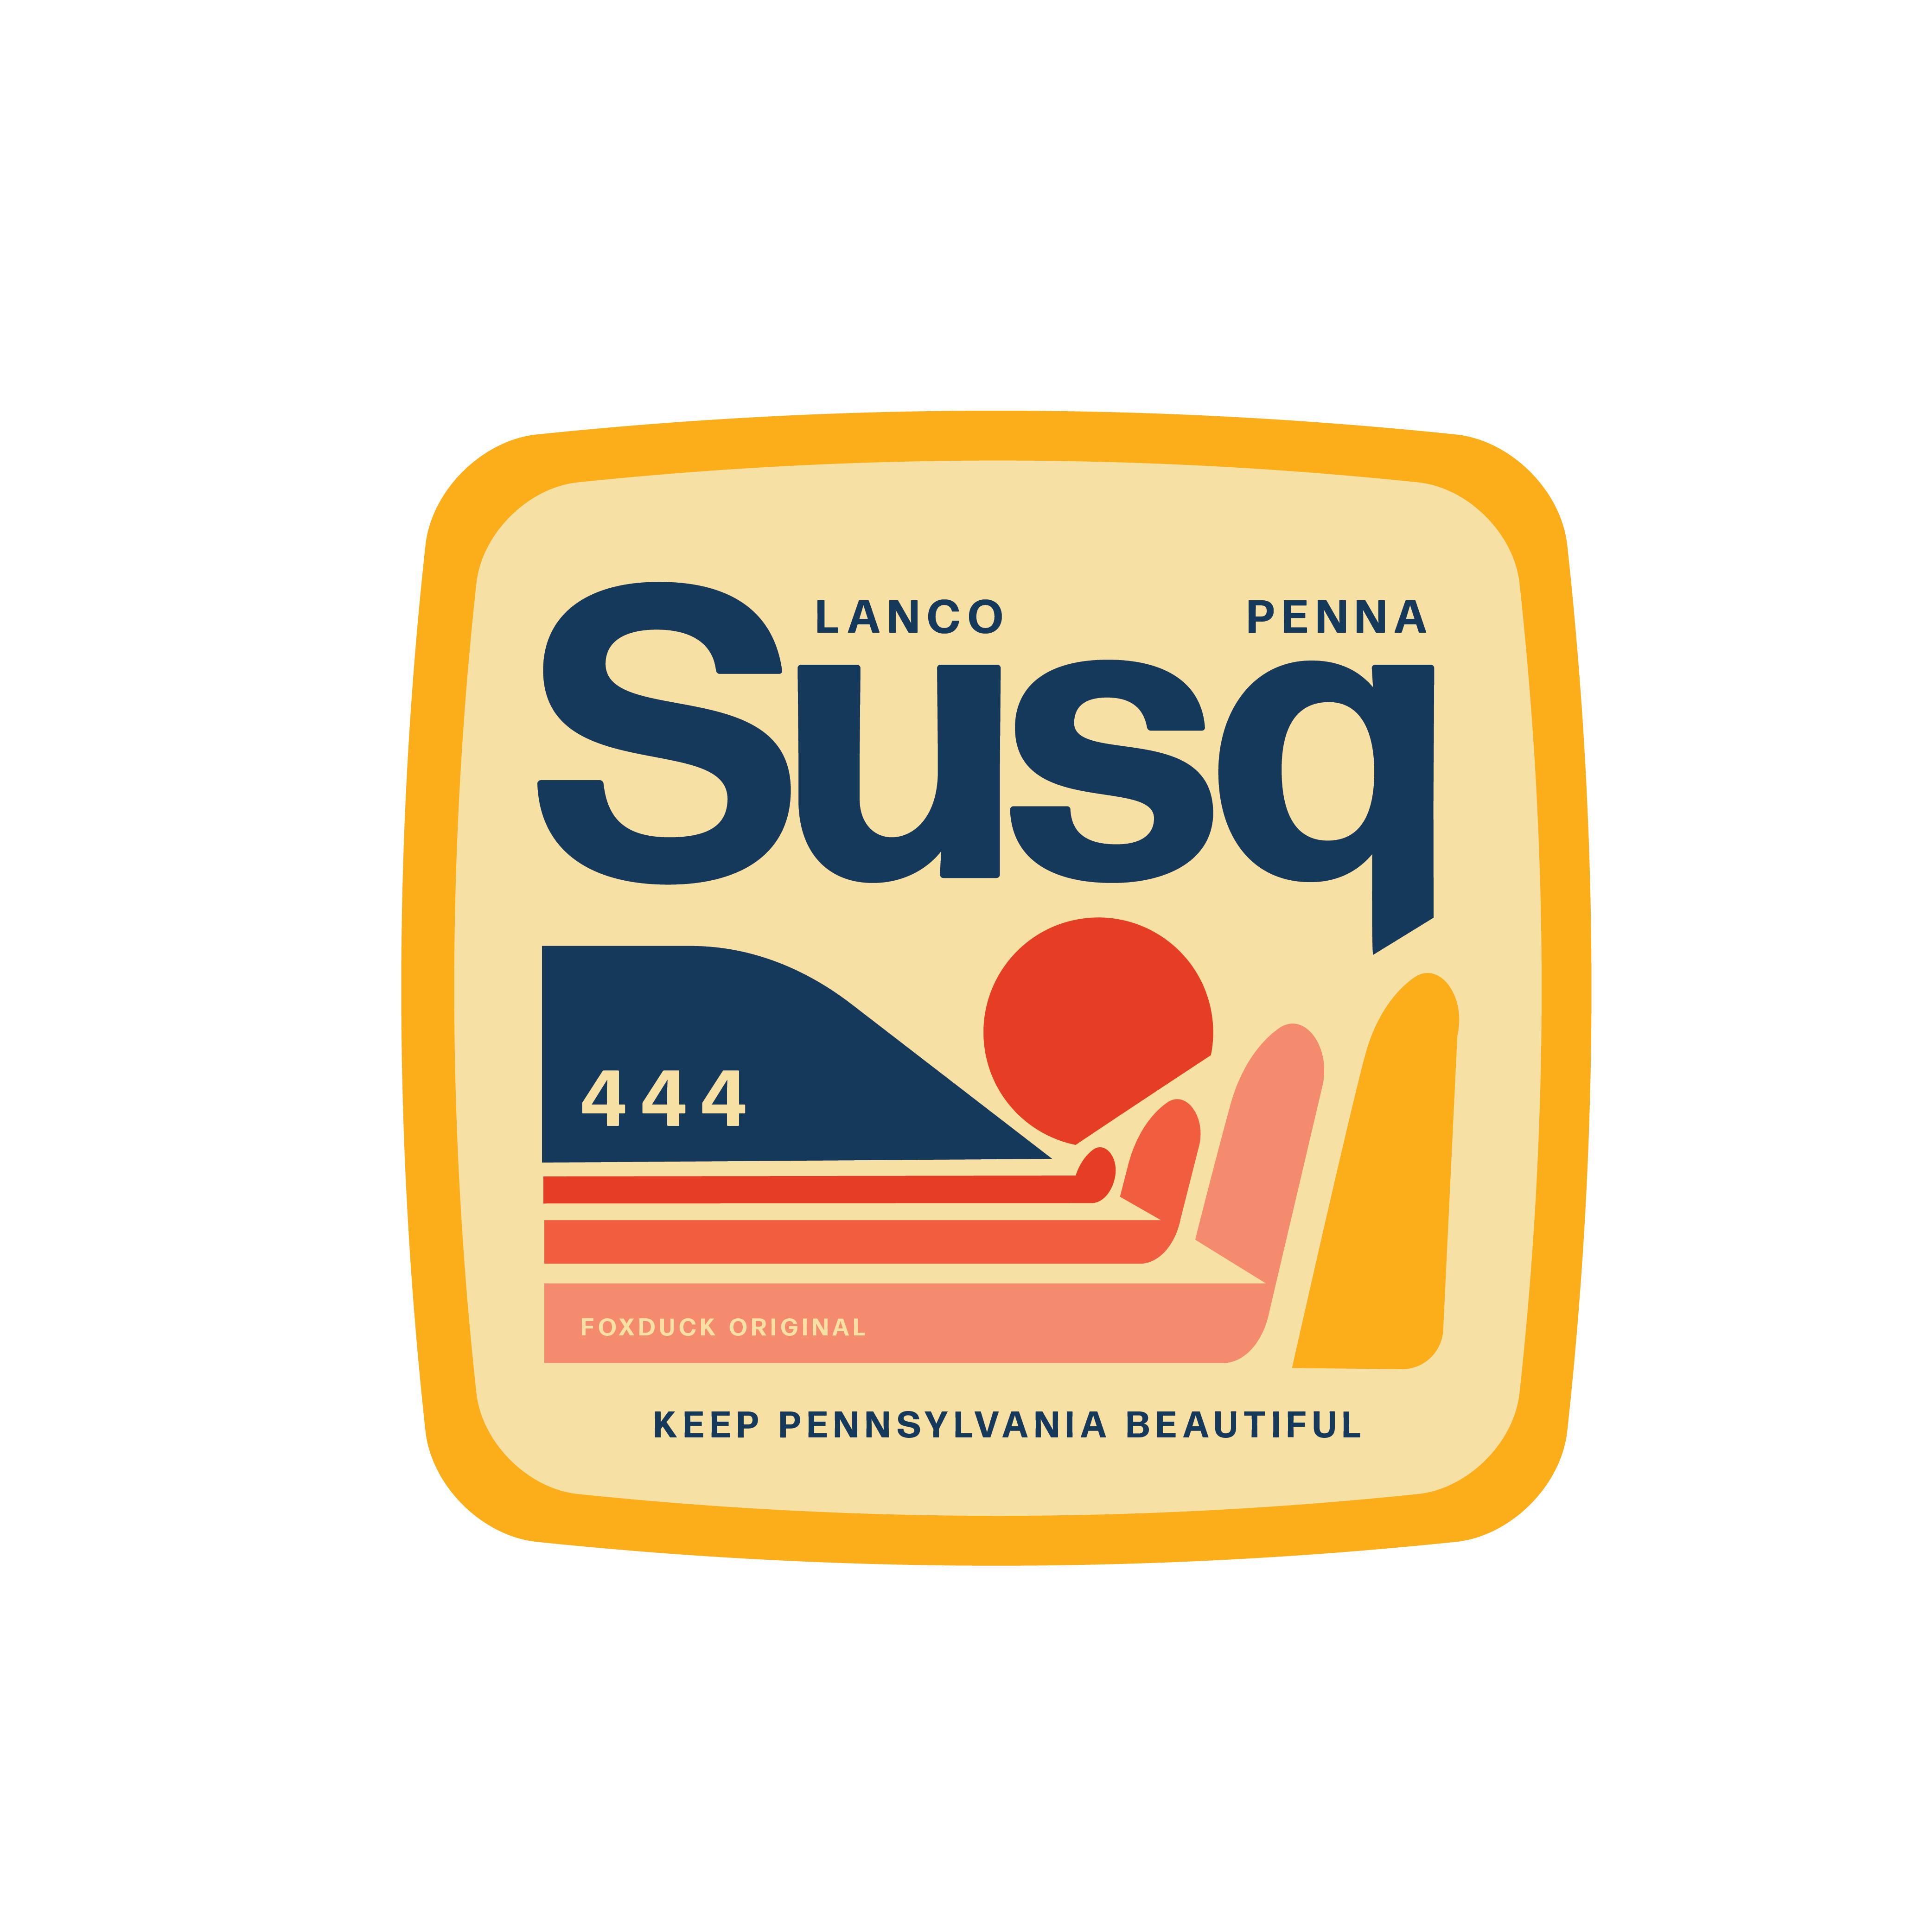 Susq 2021 logo design by logo designer Foxduck for your inspiration and for the worlds largest logo competition